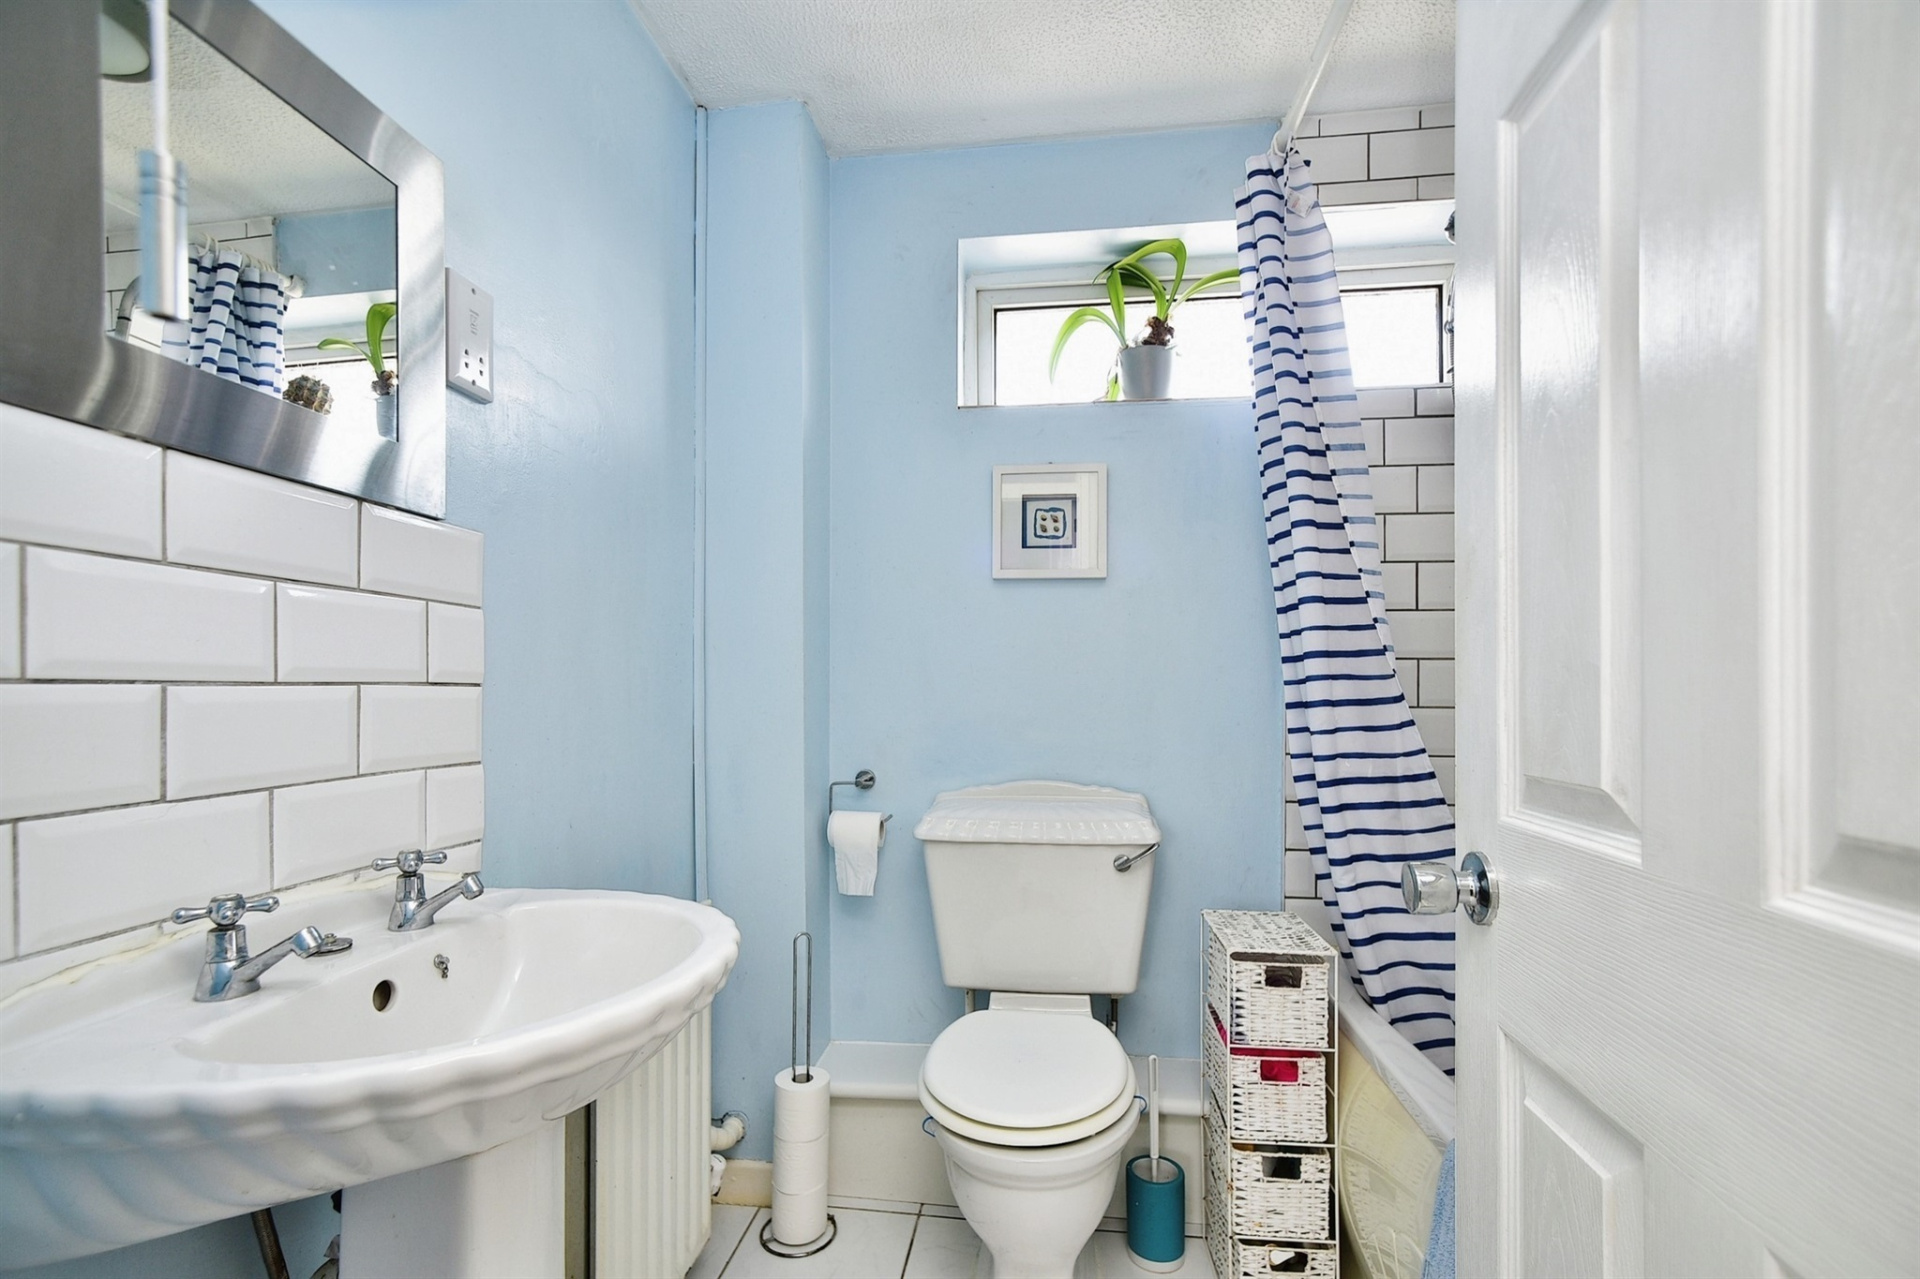 Bathroom with sky blue walls and white tiles.